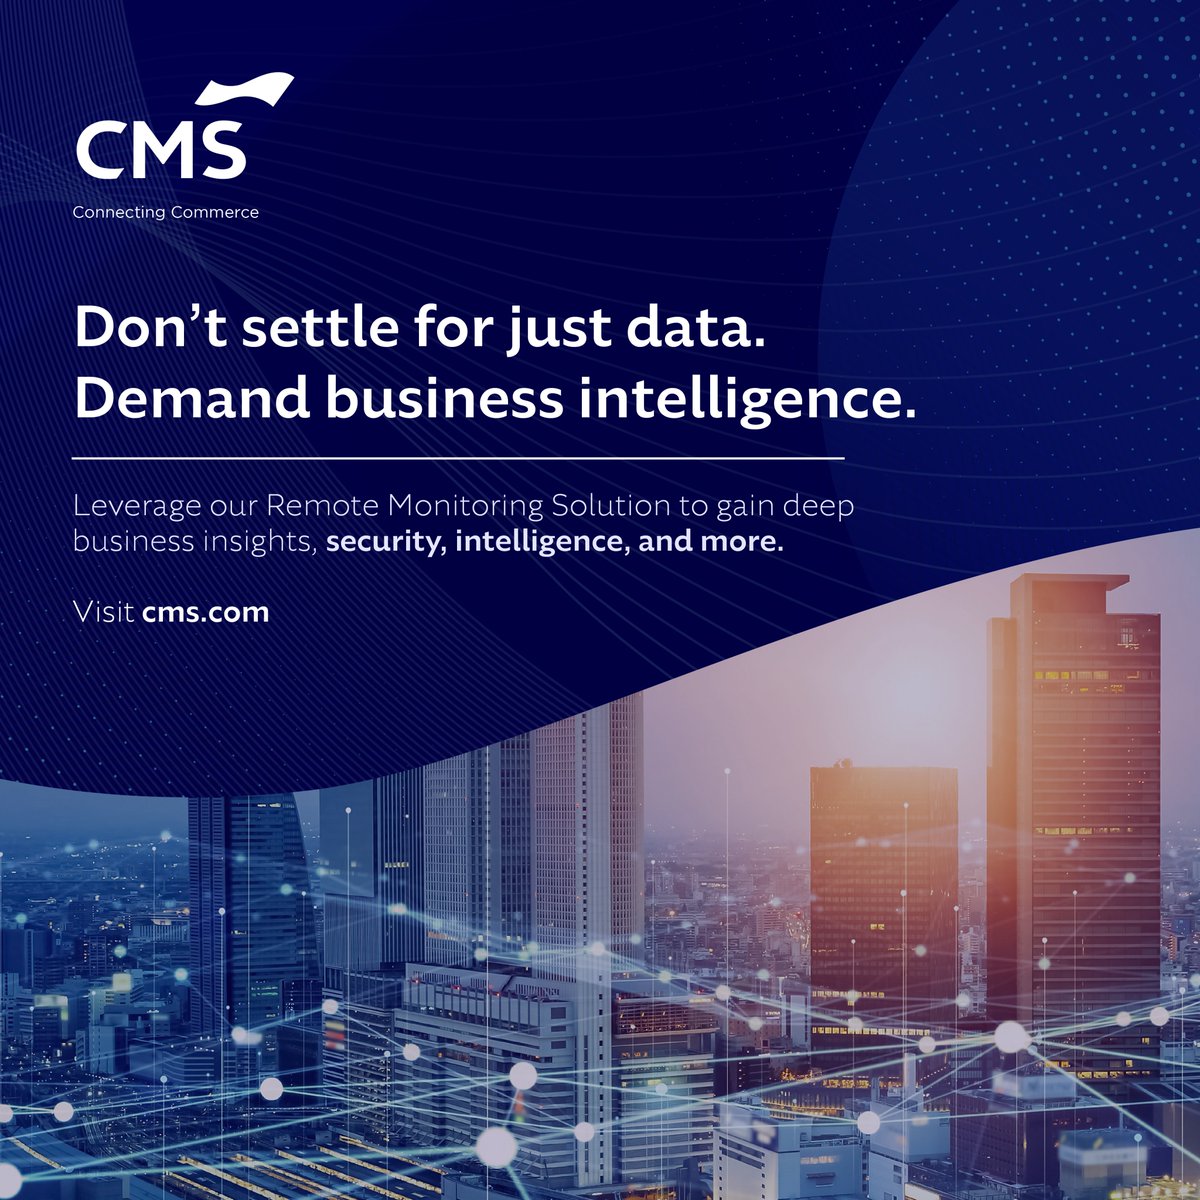 Just capturing data is not enough for business growth. Transform data into business intelligence with AI-powered Remote Monitoring Solution and improve your productivity. Find out more here: bit.ly/46vxJYB